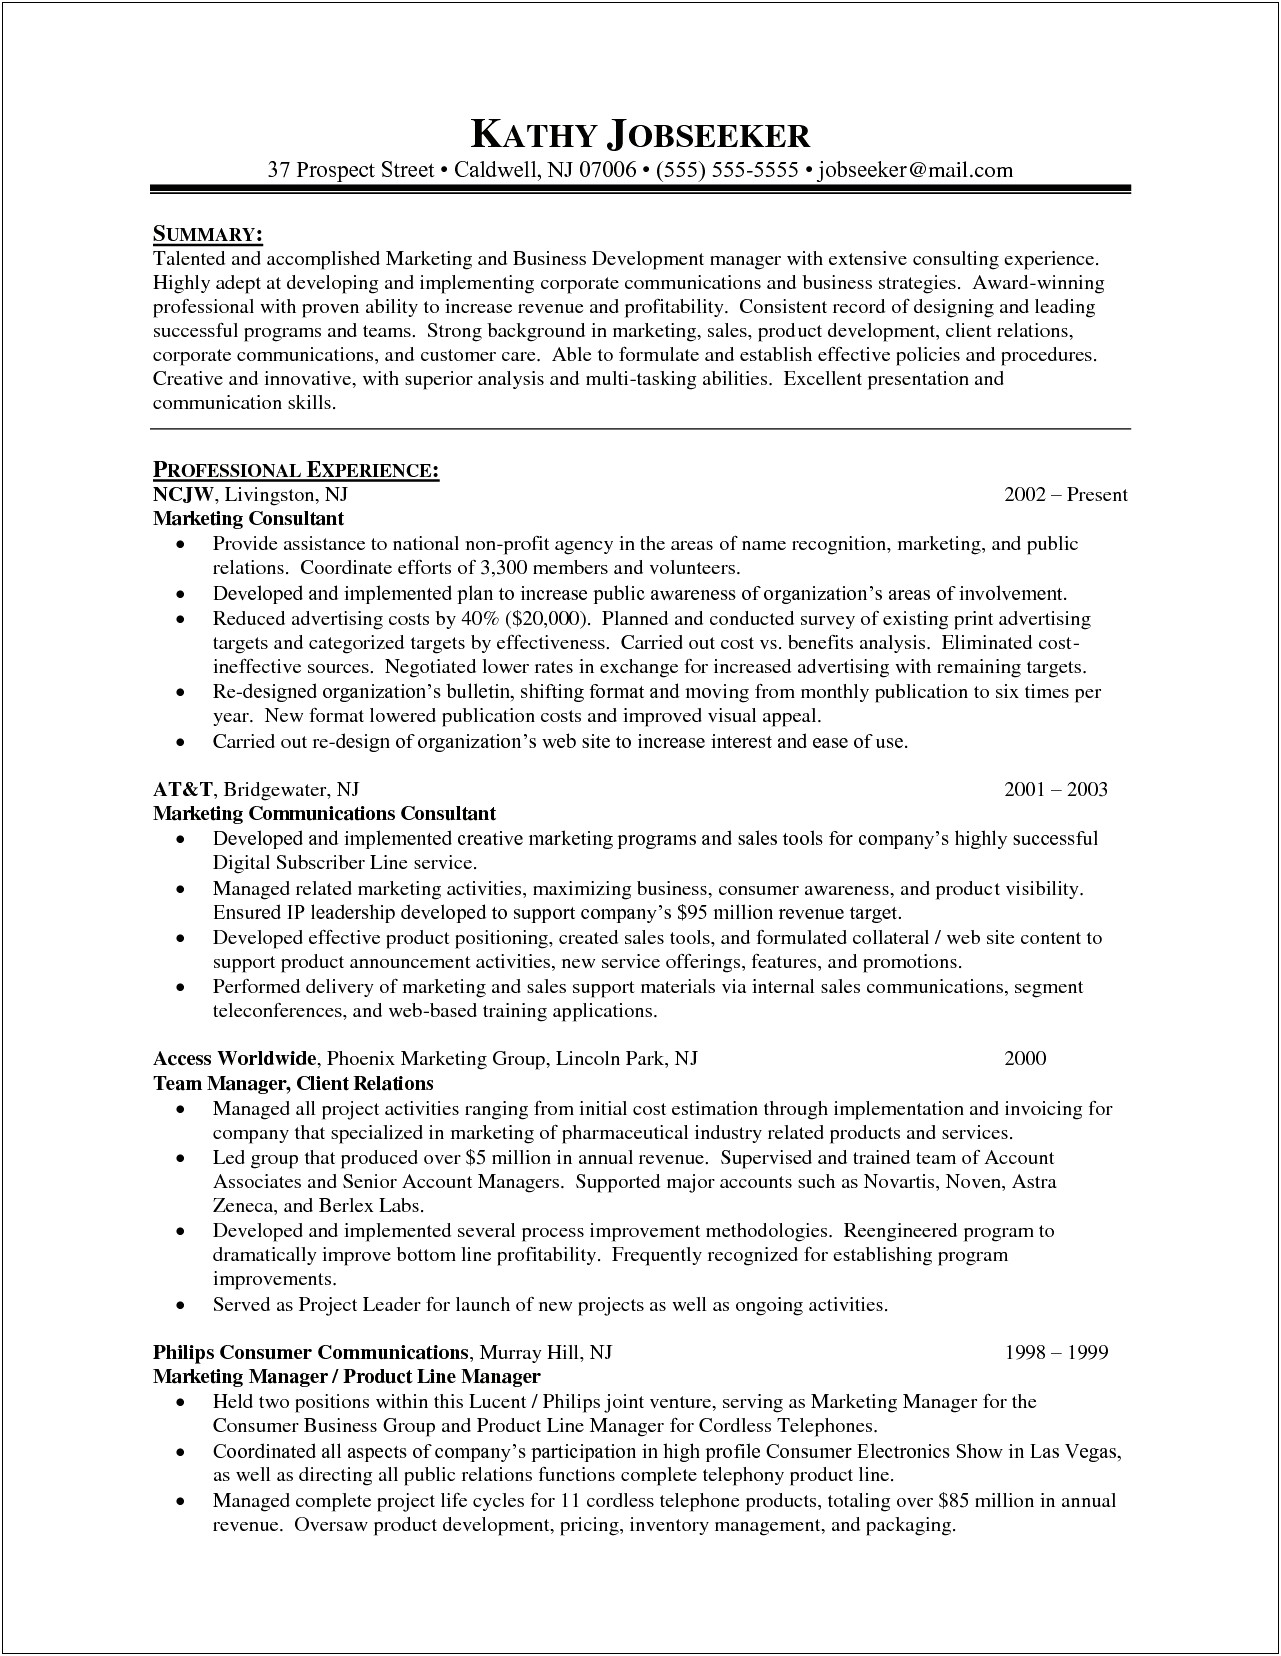 Resume Objectives For A Pharmacy Tech